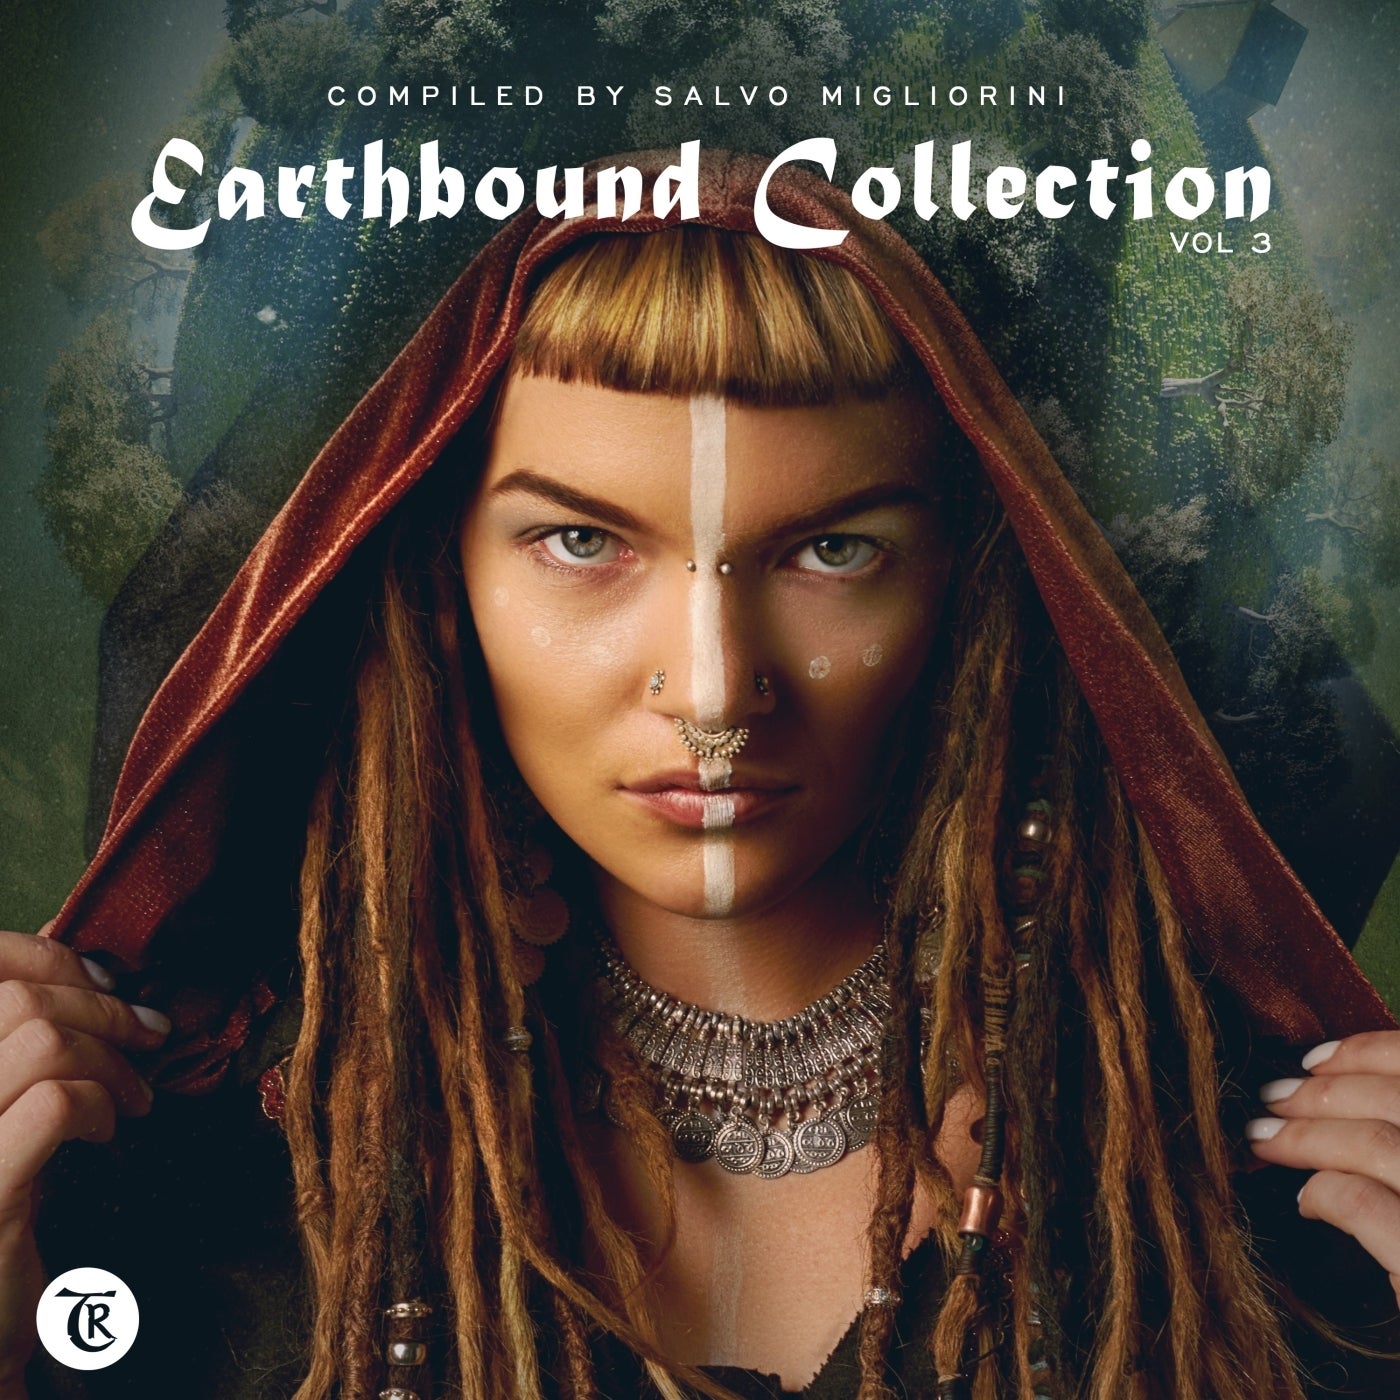 VA - Earthbound Collection, Vol. 3 (Compiled by Salvo Migliorini) [TR086]